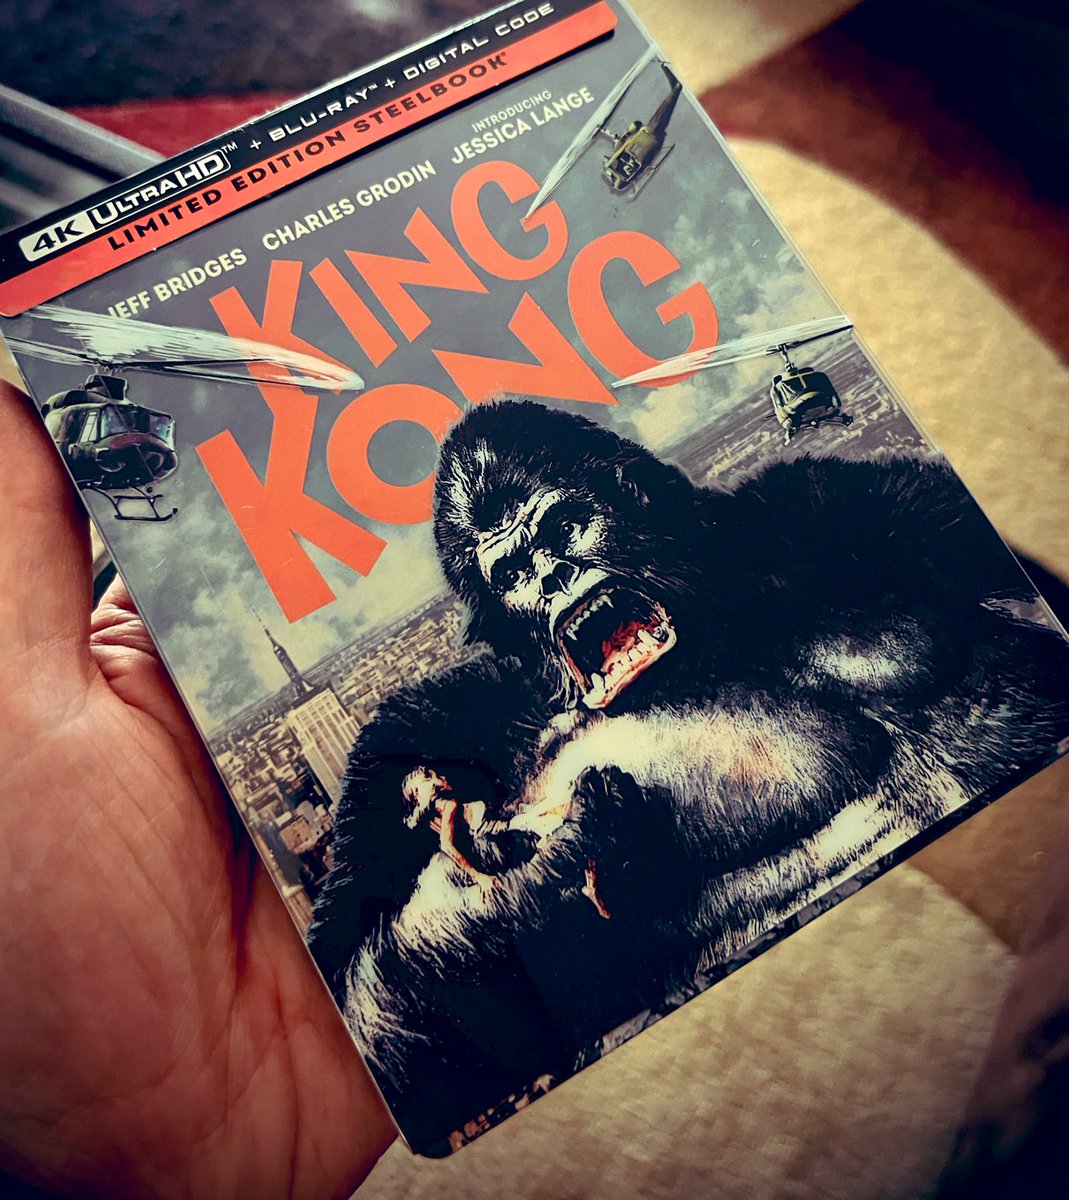 The much-maligned 1976 film #KingKong 4K Steelbook is here! 🍌 I used to be one of the ride operators at the sorely missed “Kongfrontation” attraction at @UniversalORL in the 90’s. The attraction was based on this movie. I’m going to have a good time visiting my old friend.